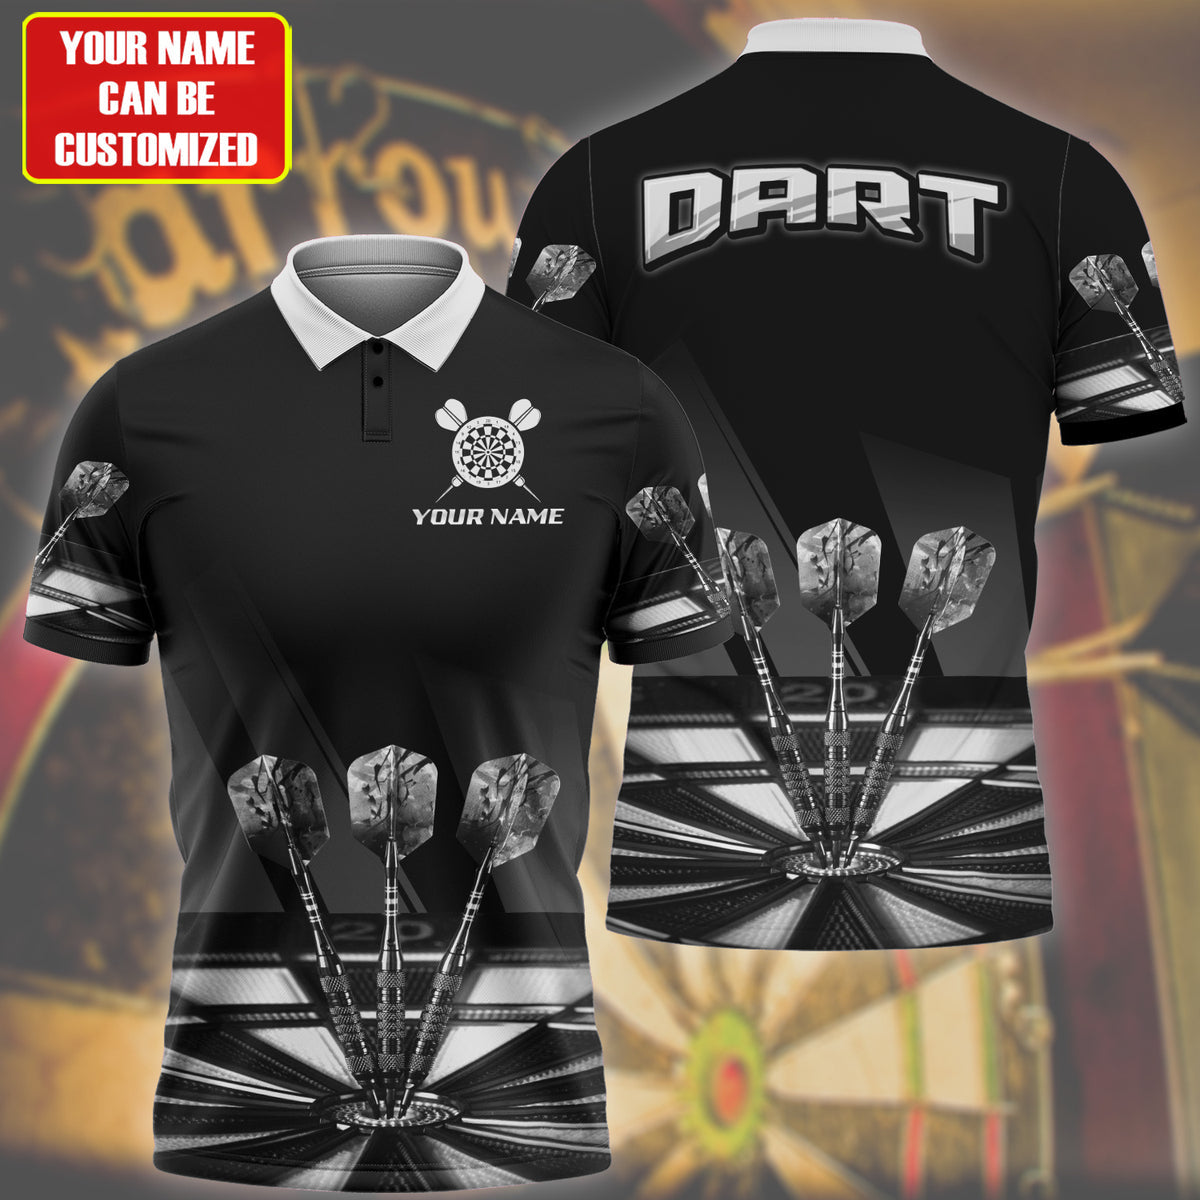 3D All Over Print Multi Color Dart Polo Shirt/ Gift for Dad and Son/ Dart Team Uniform